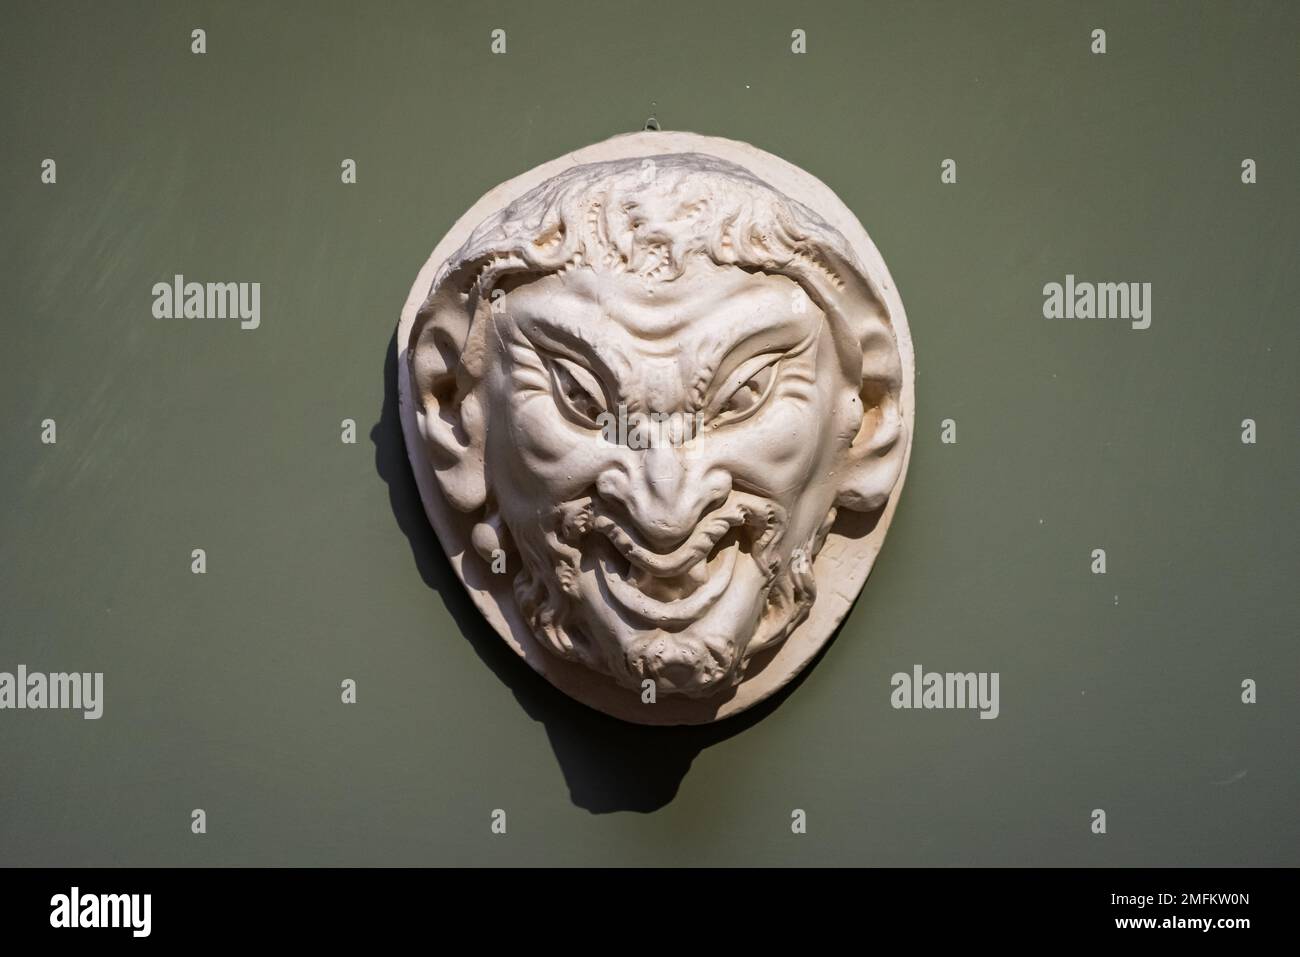 Ugly face of evil man carved in a stone amulet Stock Photo